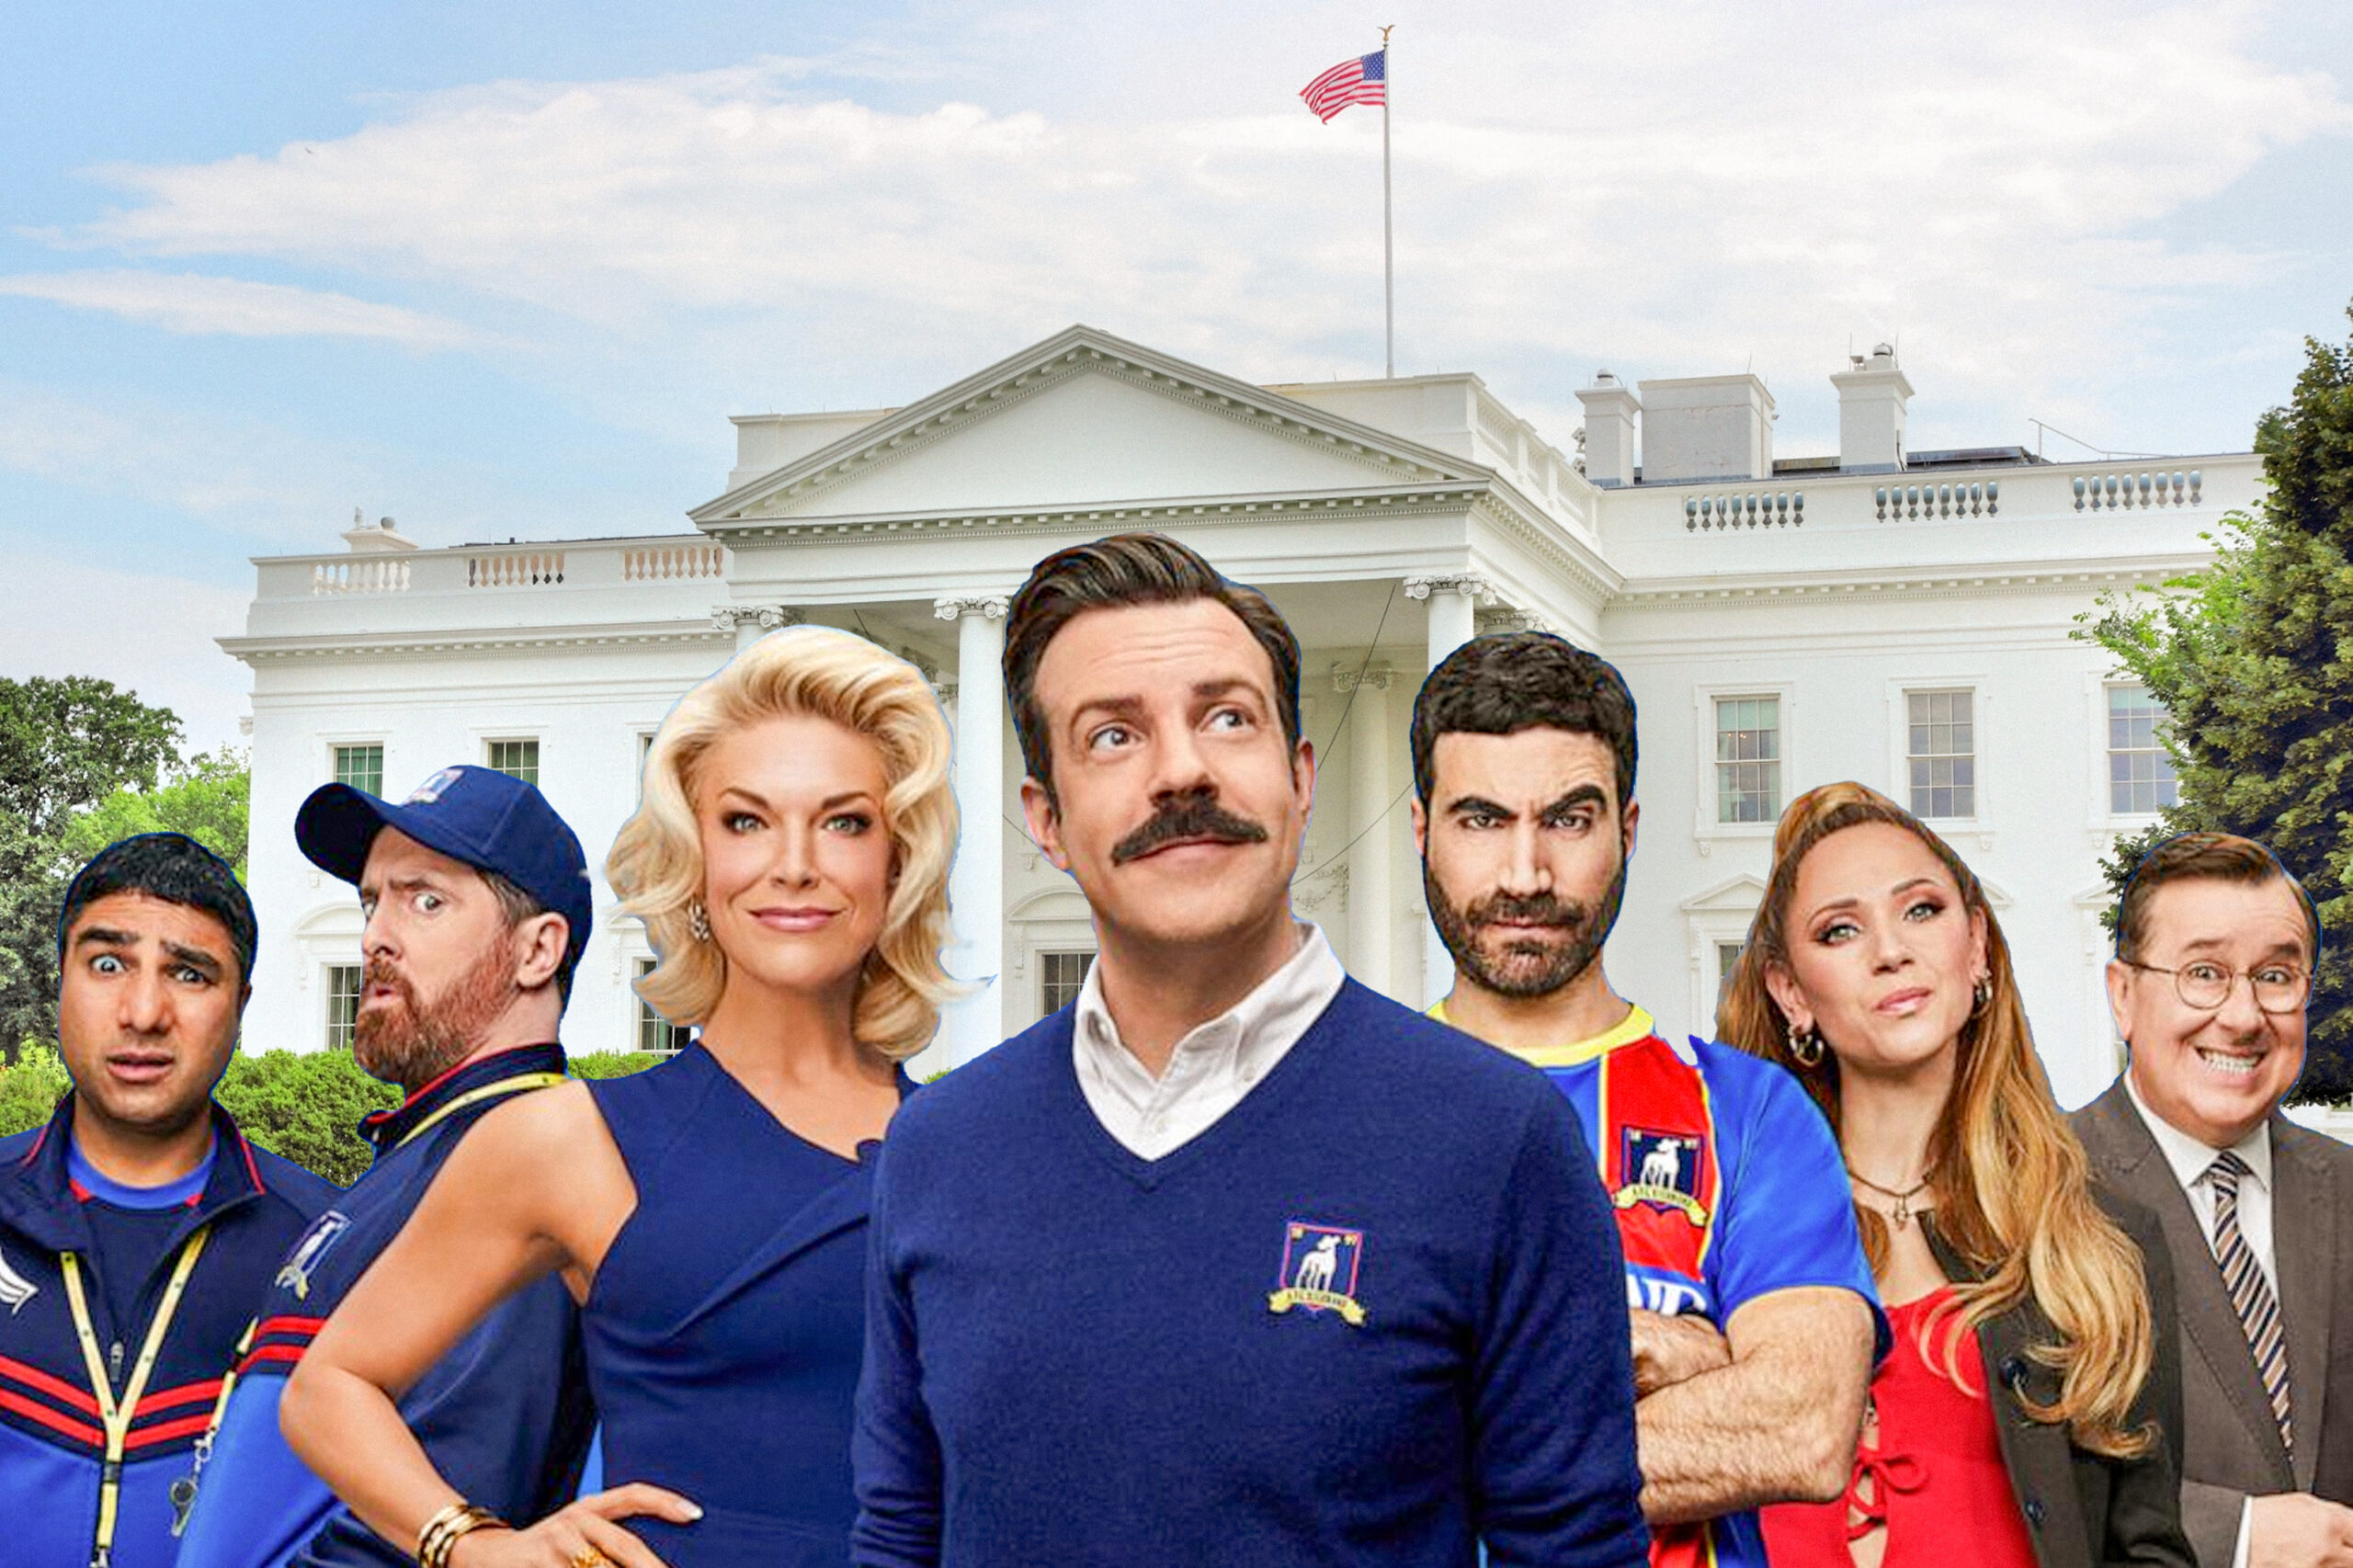 Ted Lasso' cast will visit White House for mental health discussion